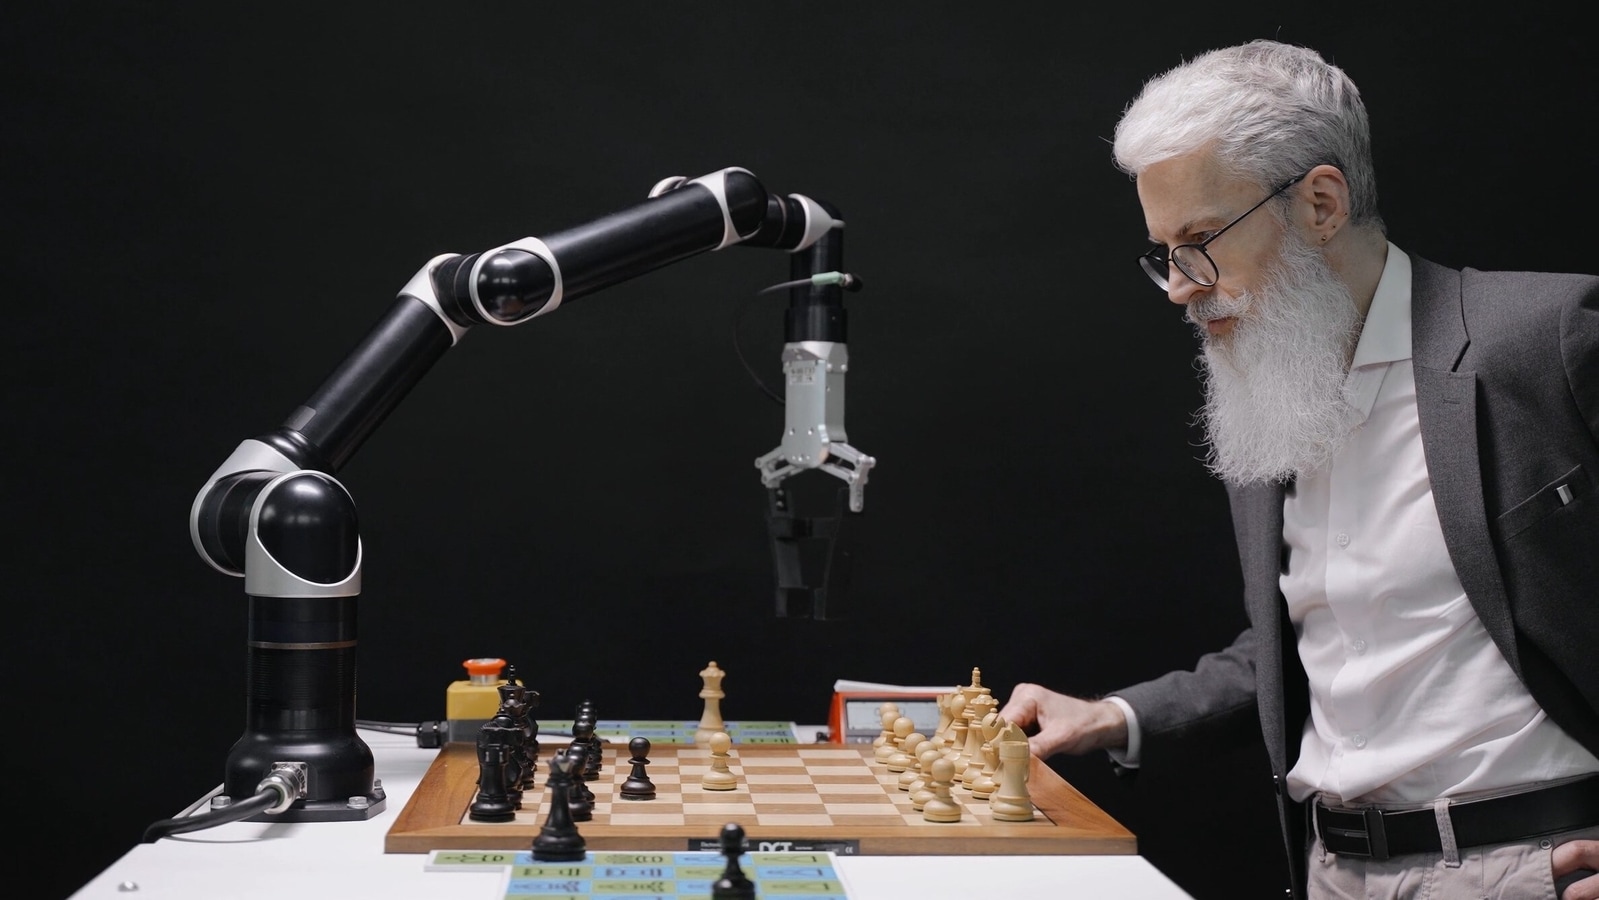 Improve your chess game with AI